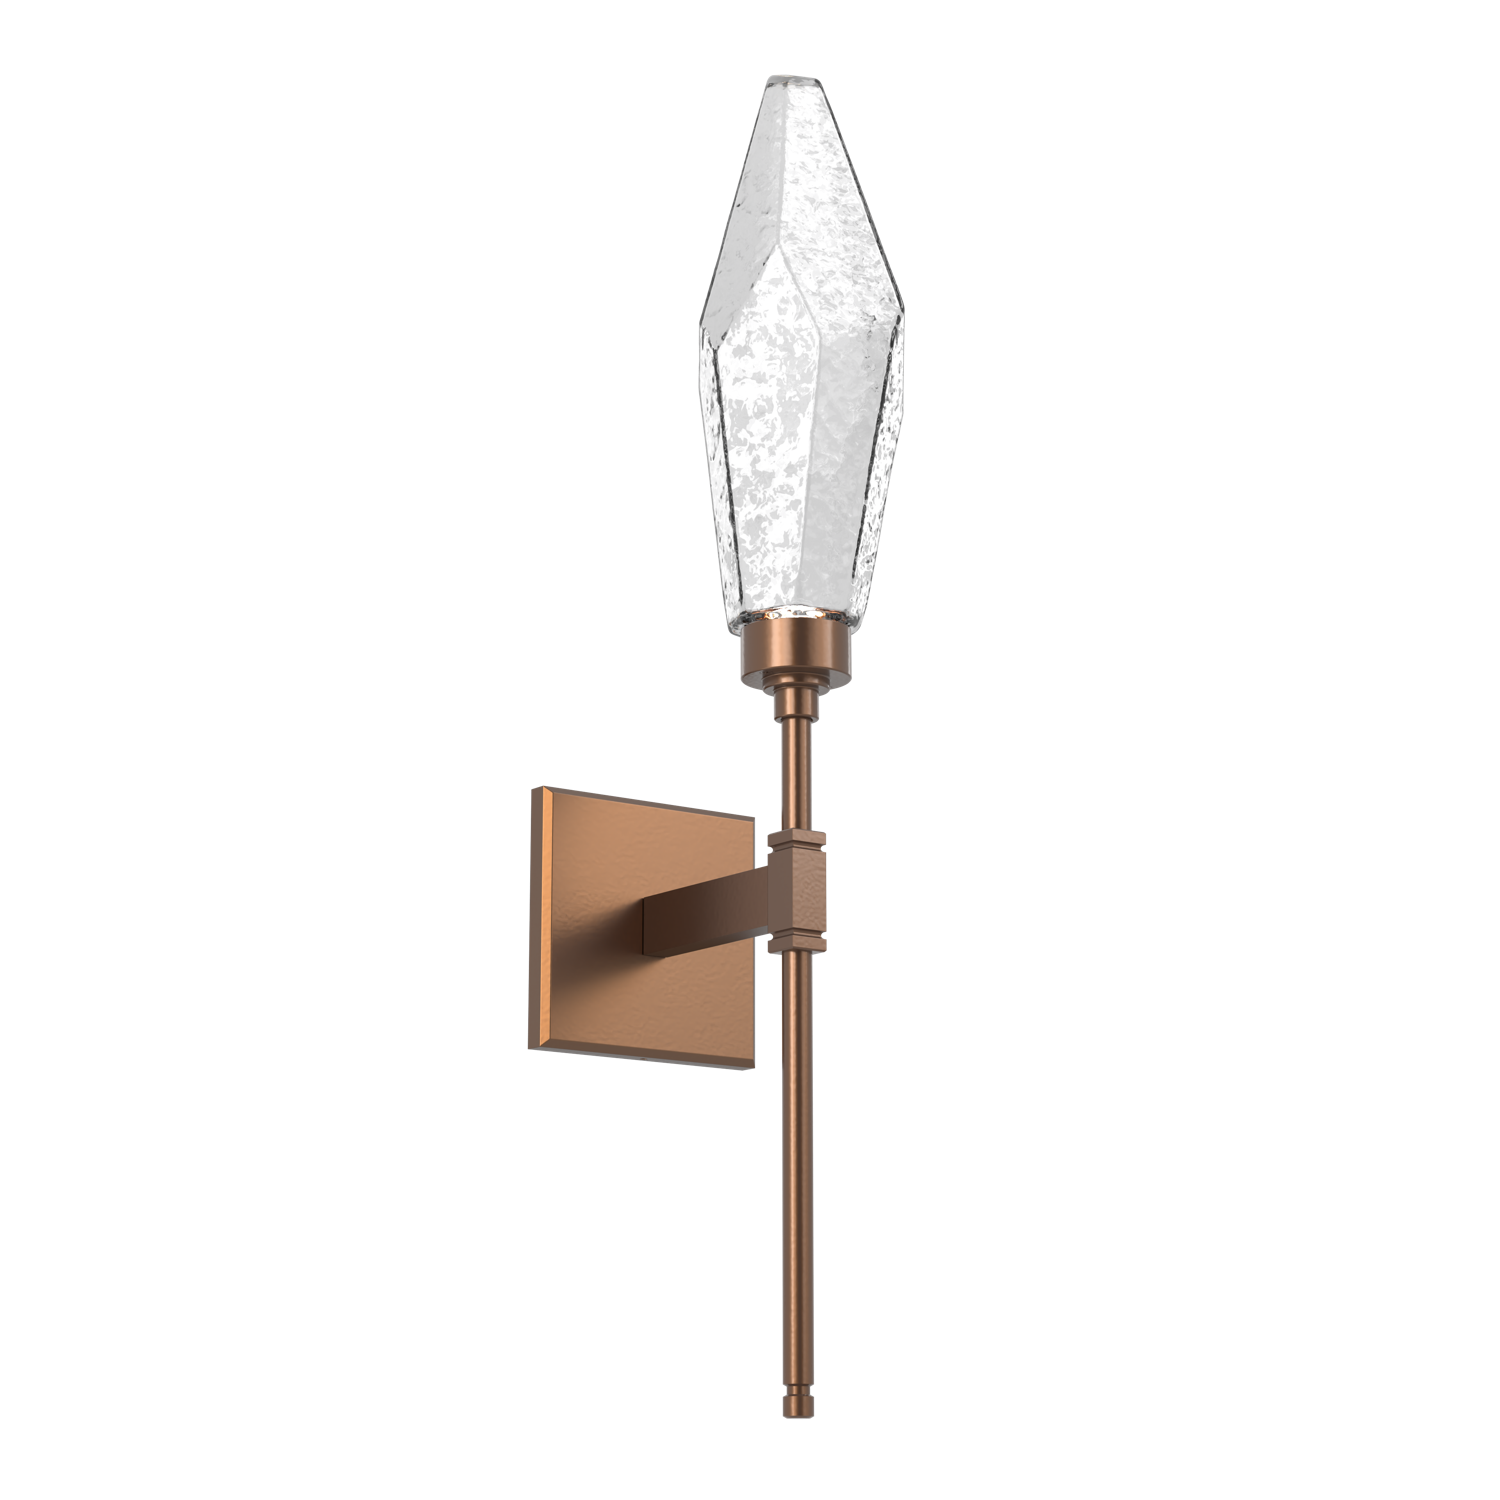 IDB0050-07-BB-CC-Hammerton-Studio-Rock-Crystal-belvedere-wall-sconce-with-burnished-bronze-finish-and-clear-glass-shades-and-LED-lamping